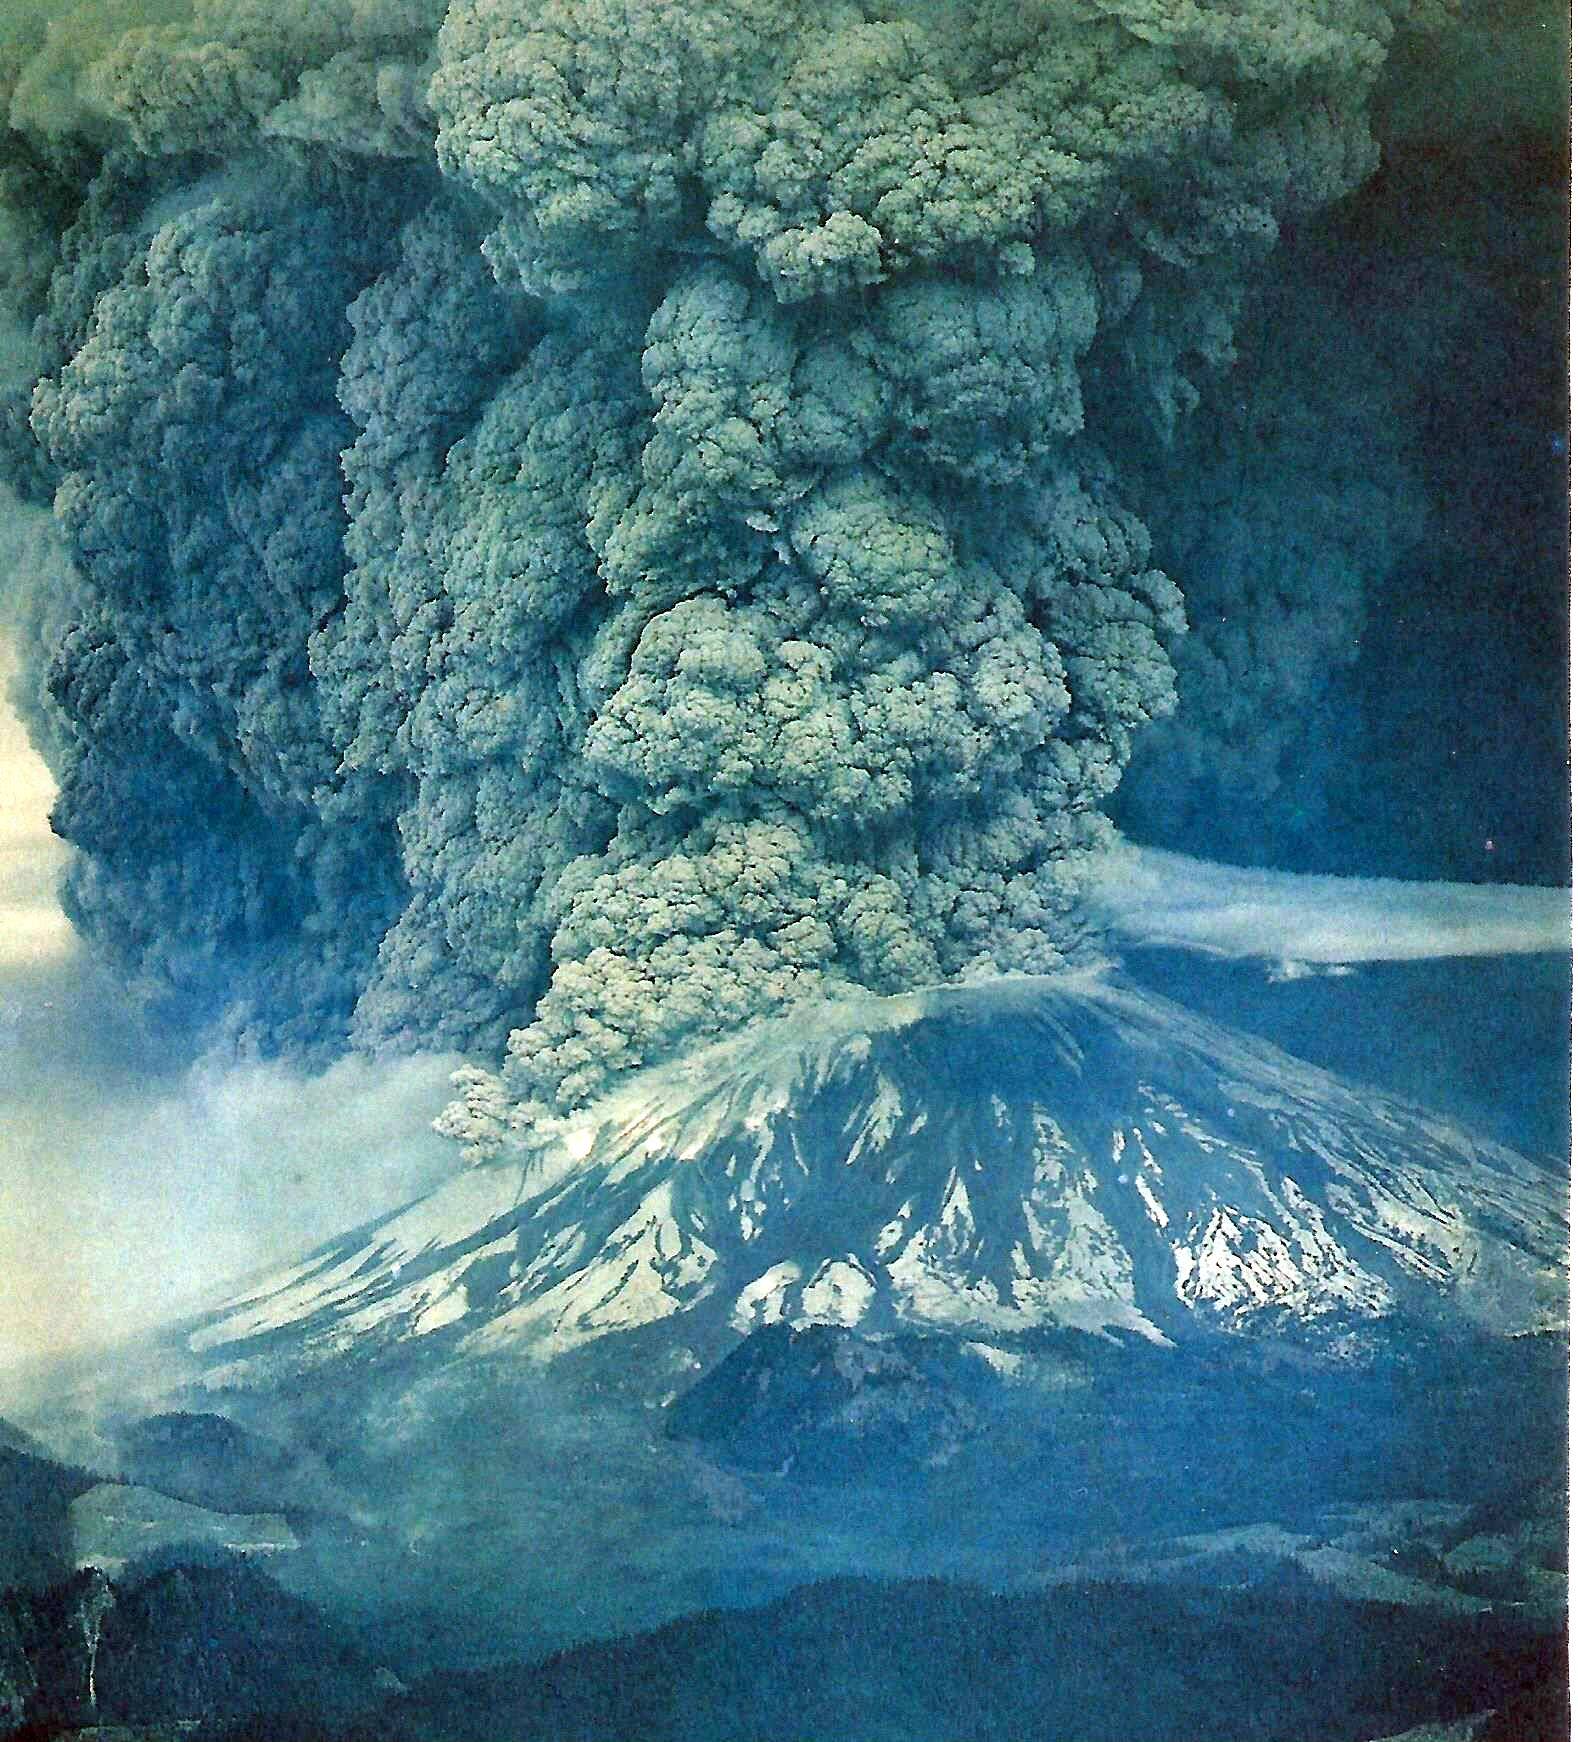 North Clark Historical Museum will present an exhibit featuring Mt. St. Helens before, during, and after the major eruption May 18, 1980 -- 41 years ago. Photo courtesy of North Clark Historical Museum